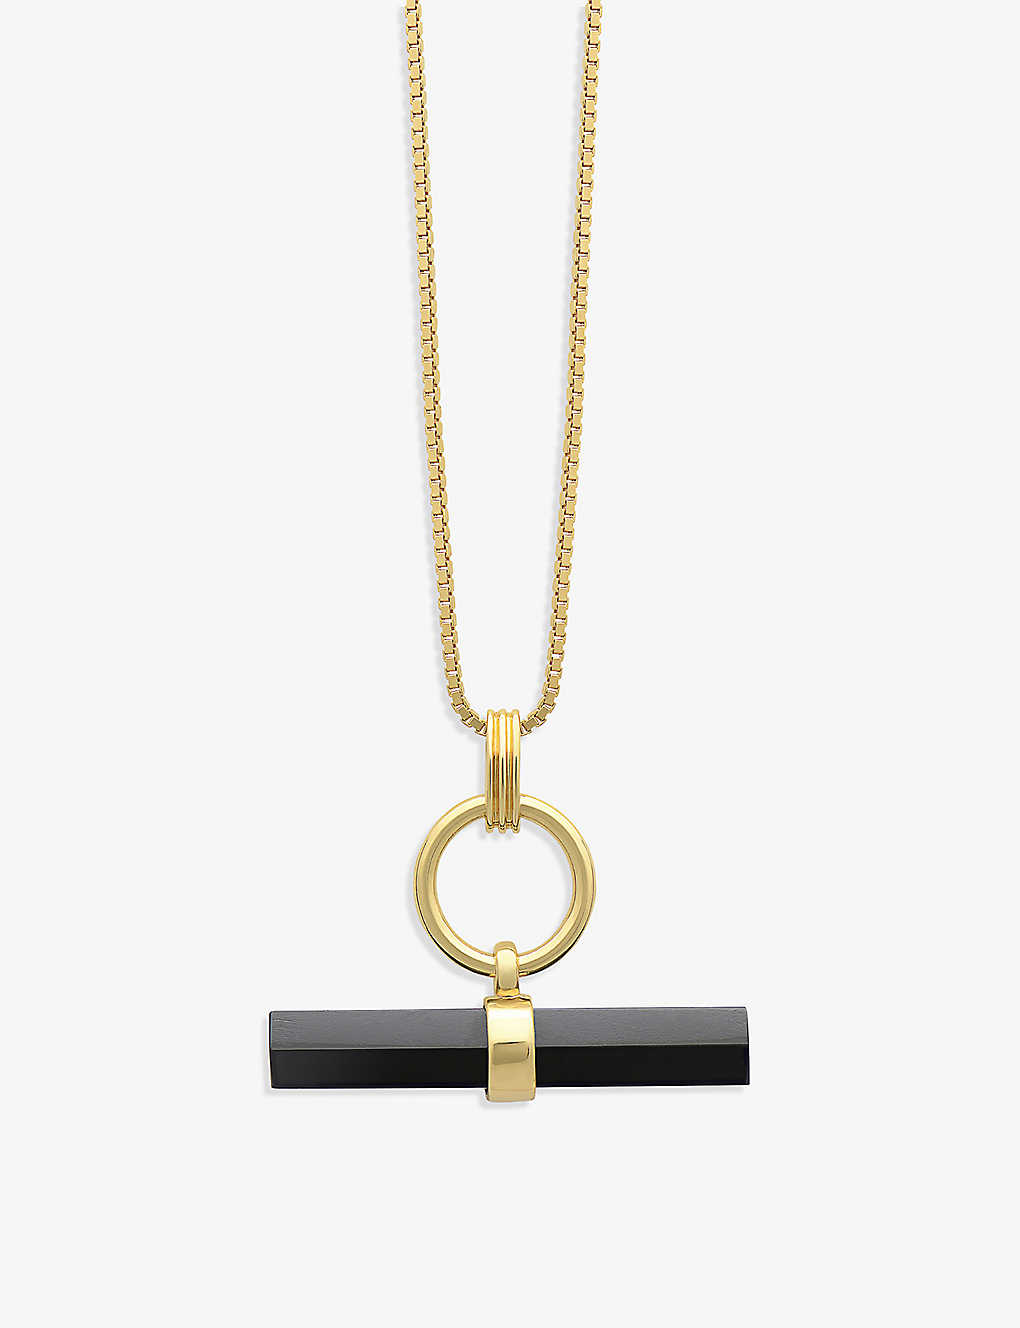 Shop Rachel Jackson Women's Gold Strength 22ct Yellow Gold-plated Sterling Silver And Onyx Pendant Neckla